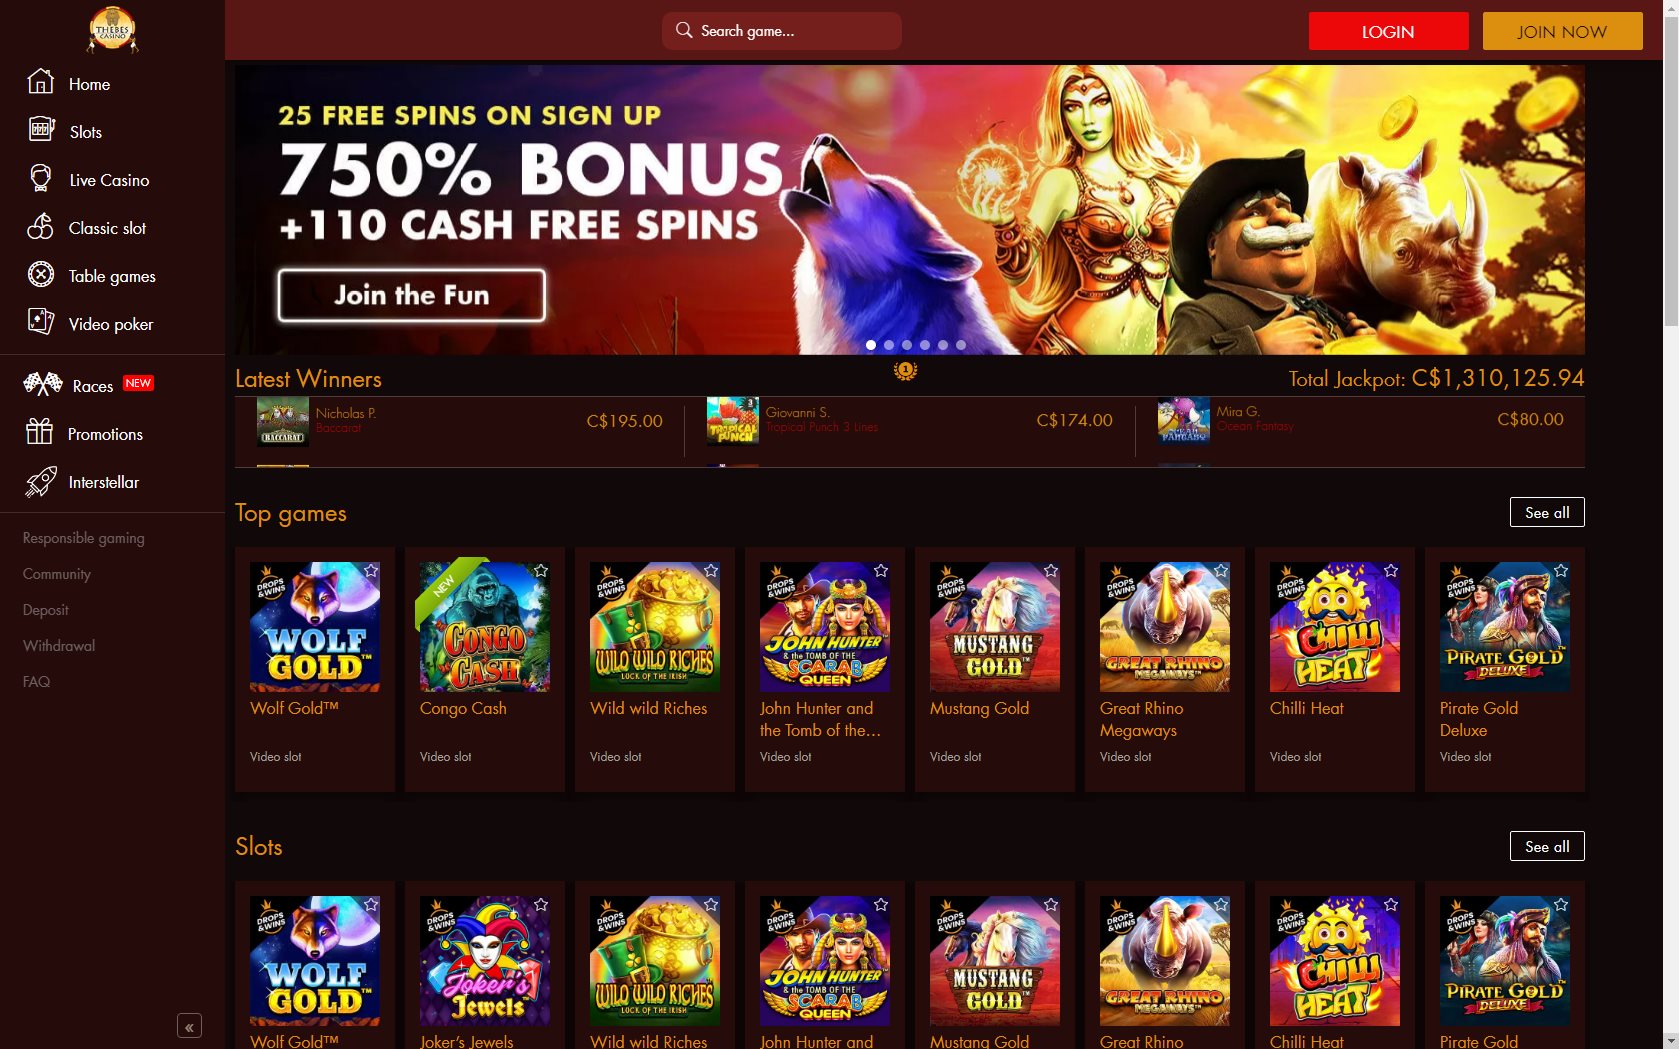 Thebes Casino Review